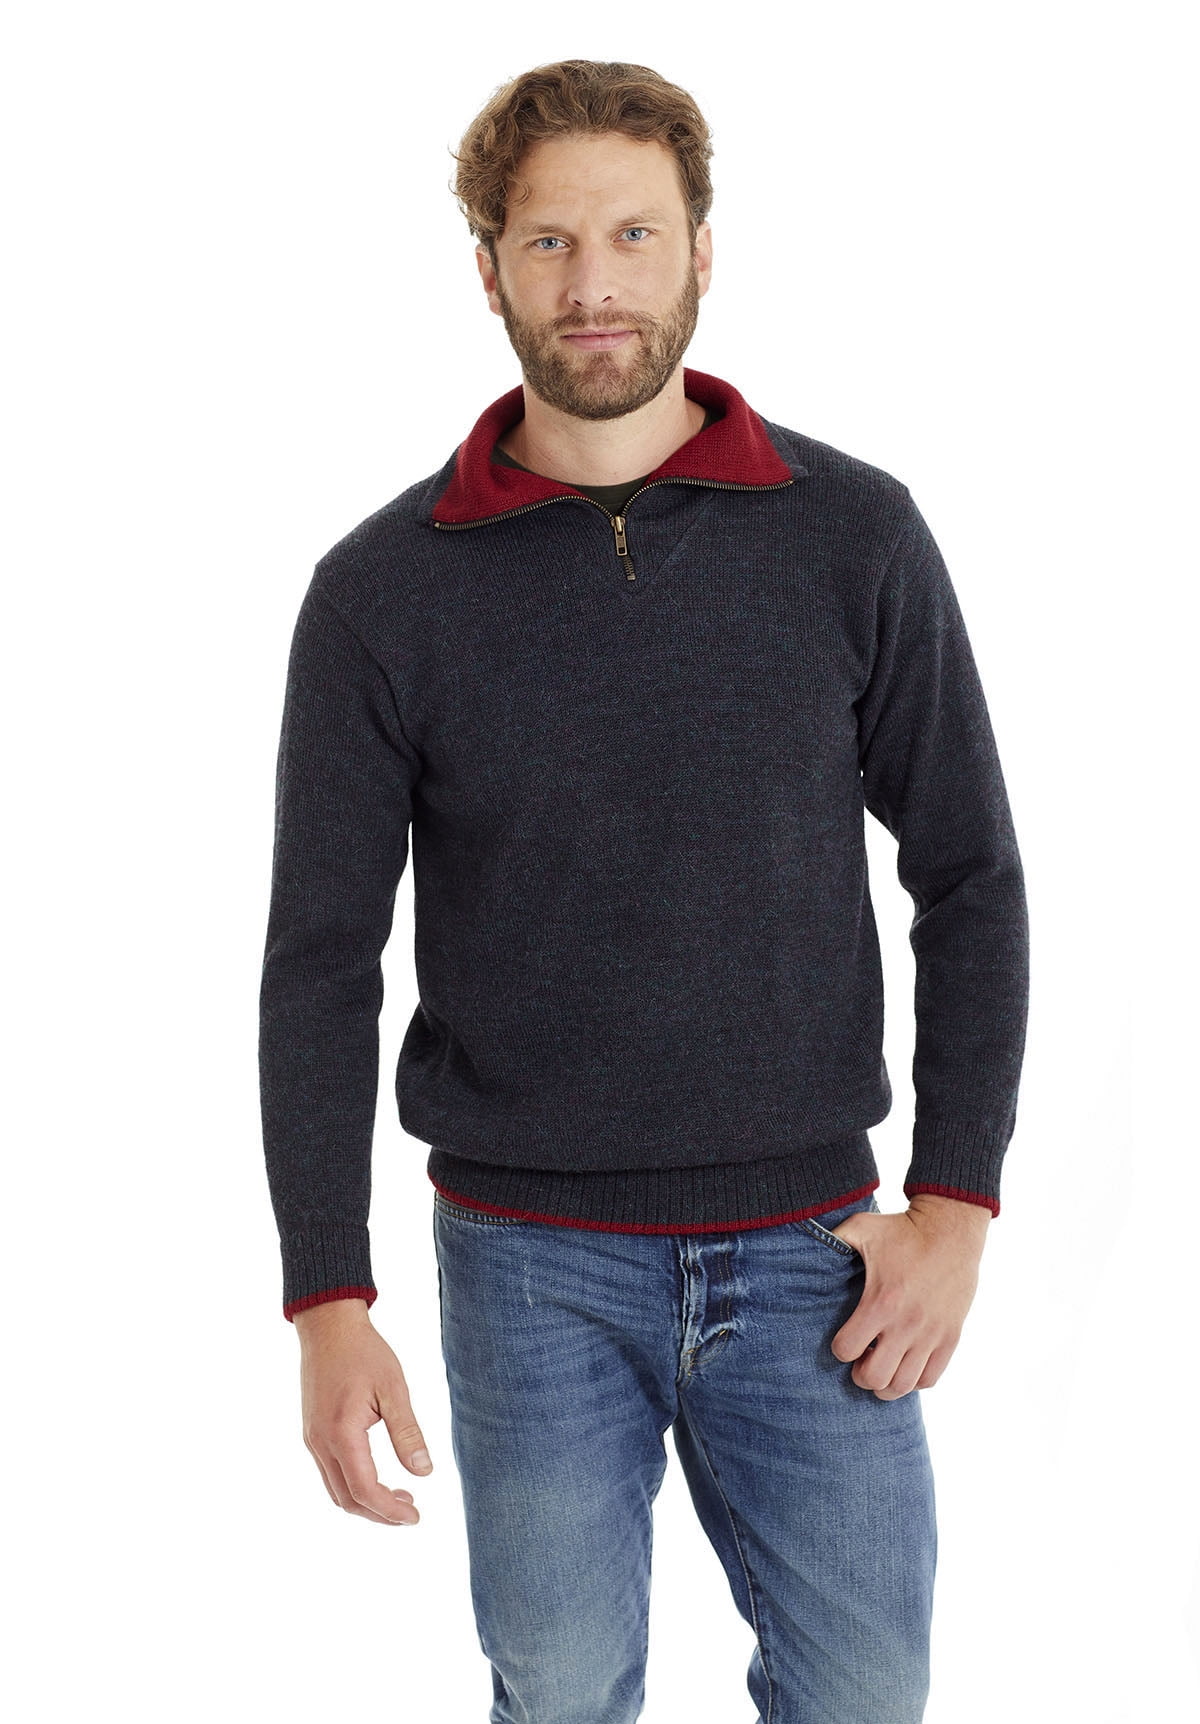 Freely Mens Twist Ombre Pullover Christmas Knitted Sweaters Outerwear